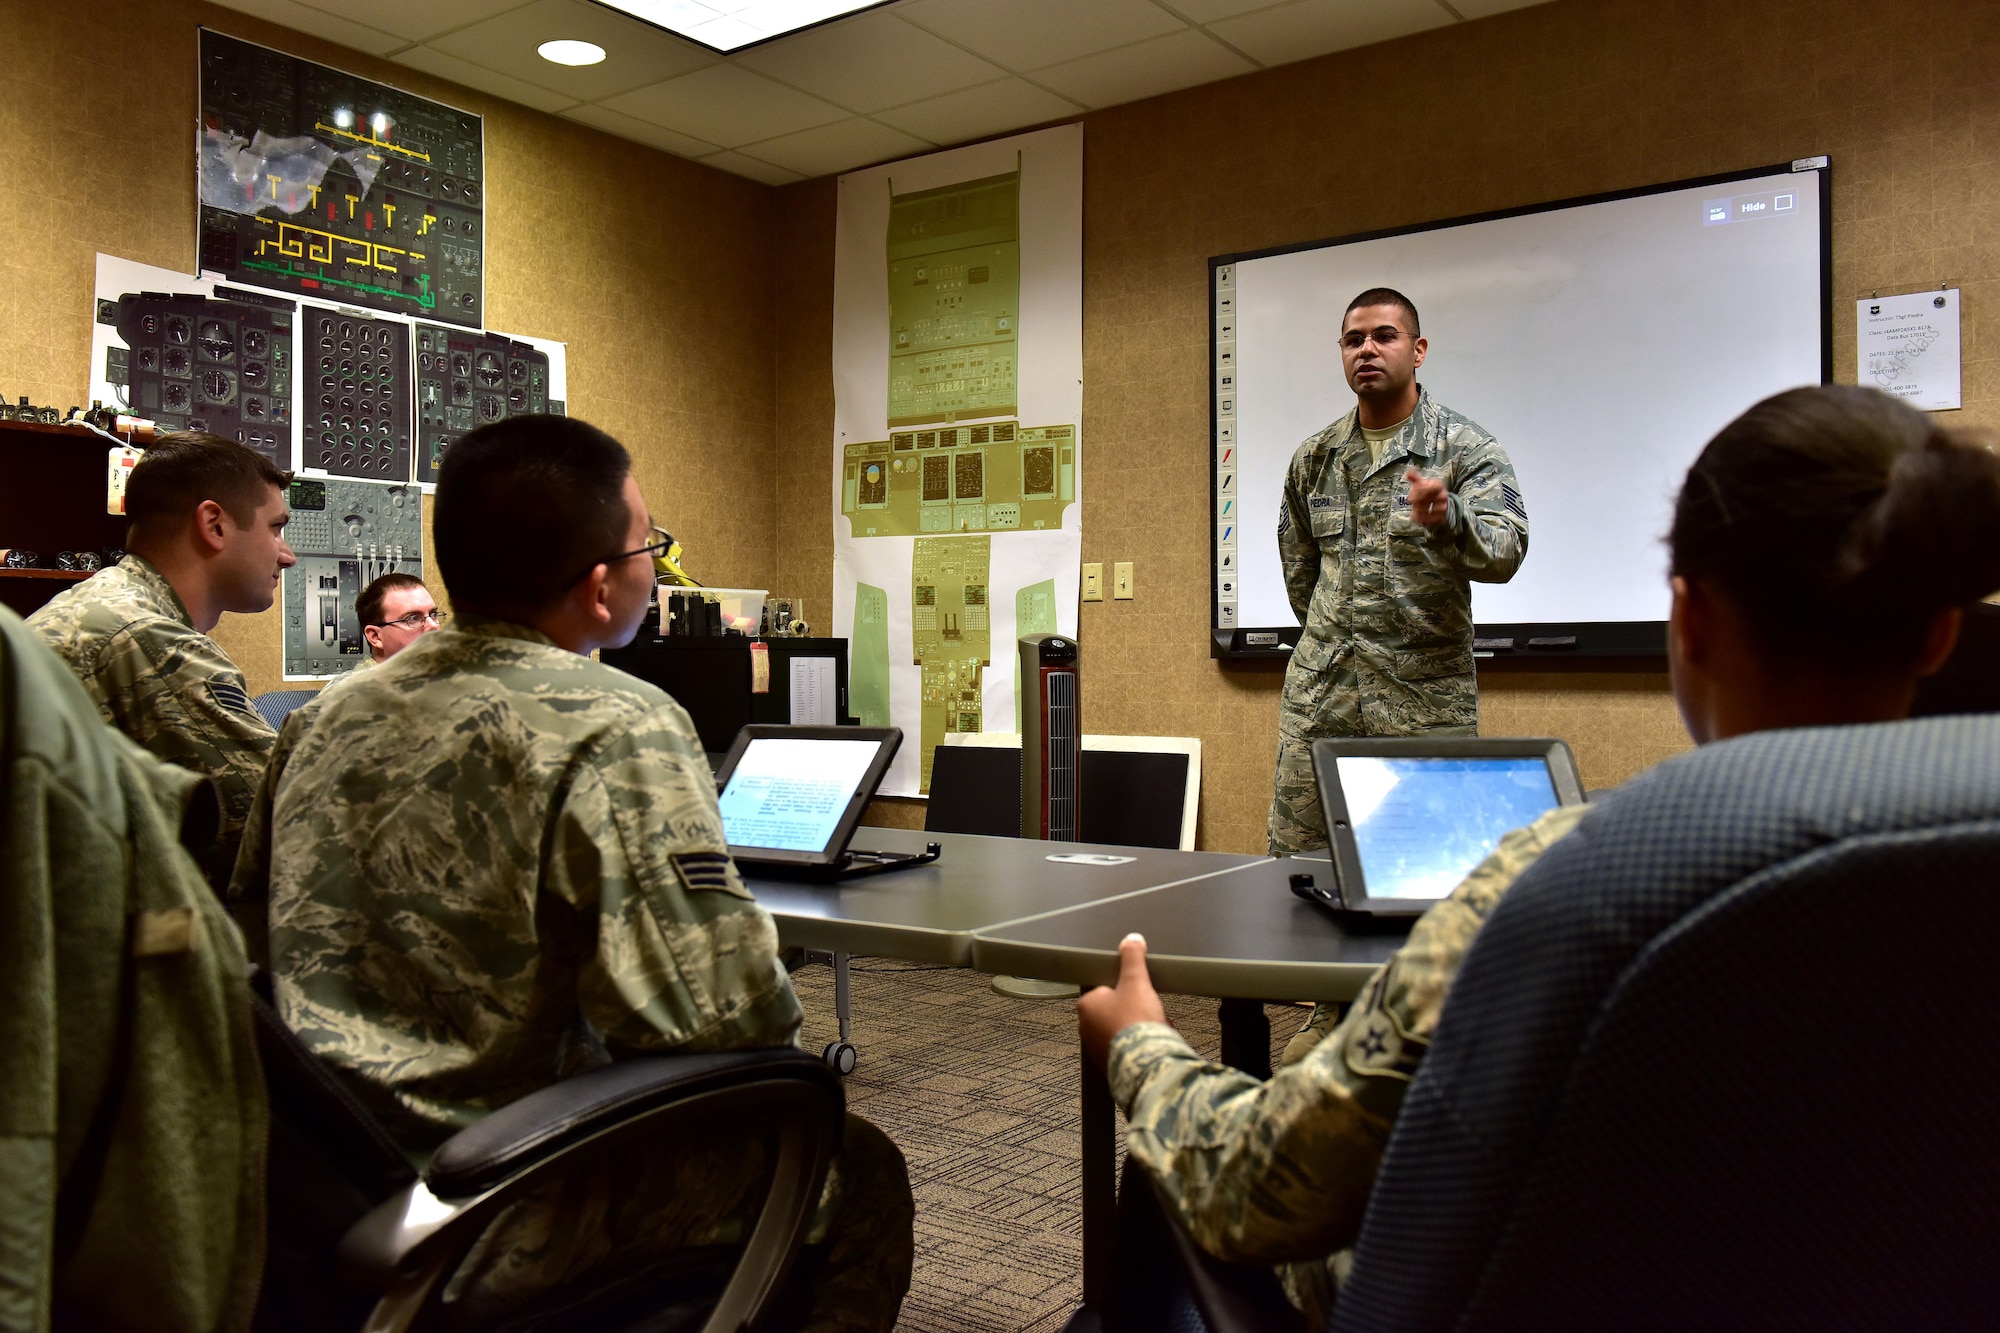 U.S. Air Force Tech. Sgt. Jose Piedra, standing, 373rd Training Squadron Detachment 4 production supervisor and instructor, goes over a final review before issuing a test to his students Feb. 23, 2017 at the Center of Excellence on Little Rock Air Force Base, Ark.  Piedra instructs more than 80 students annually in C-130J maintenance and certification.  (U.S. Air Force photo by Staff Sgt. Jeremy McGuffin)